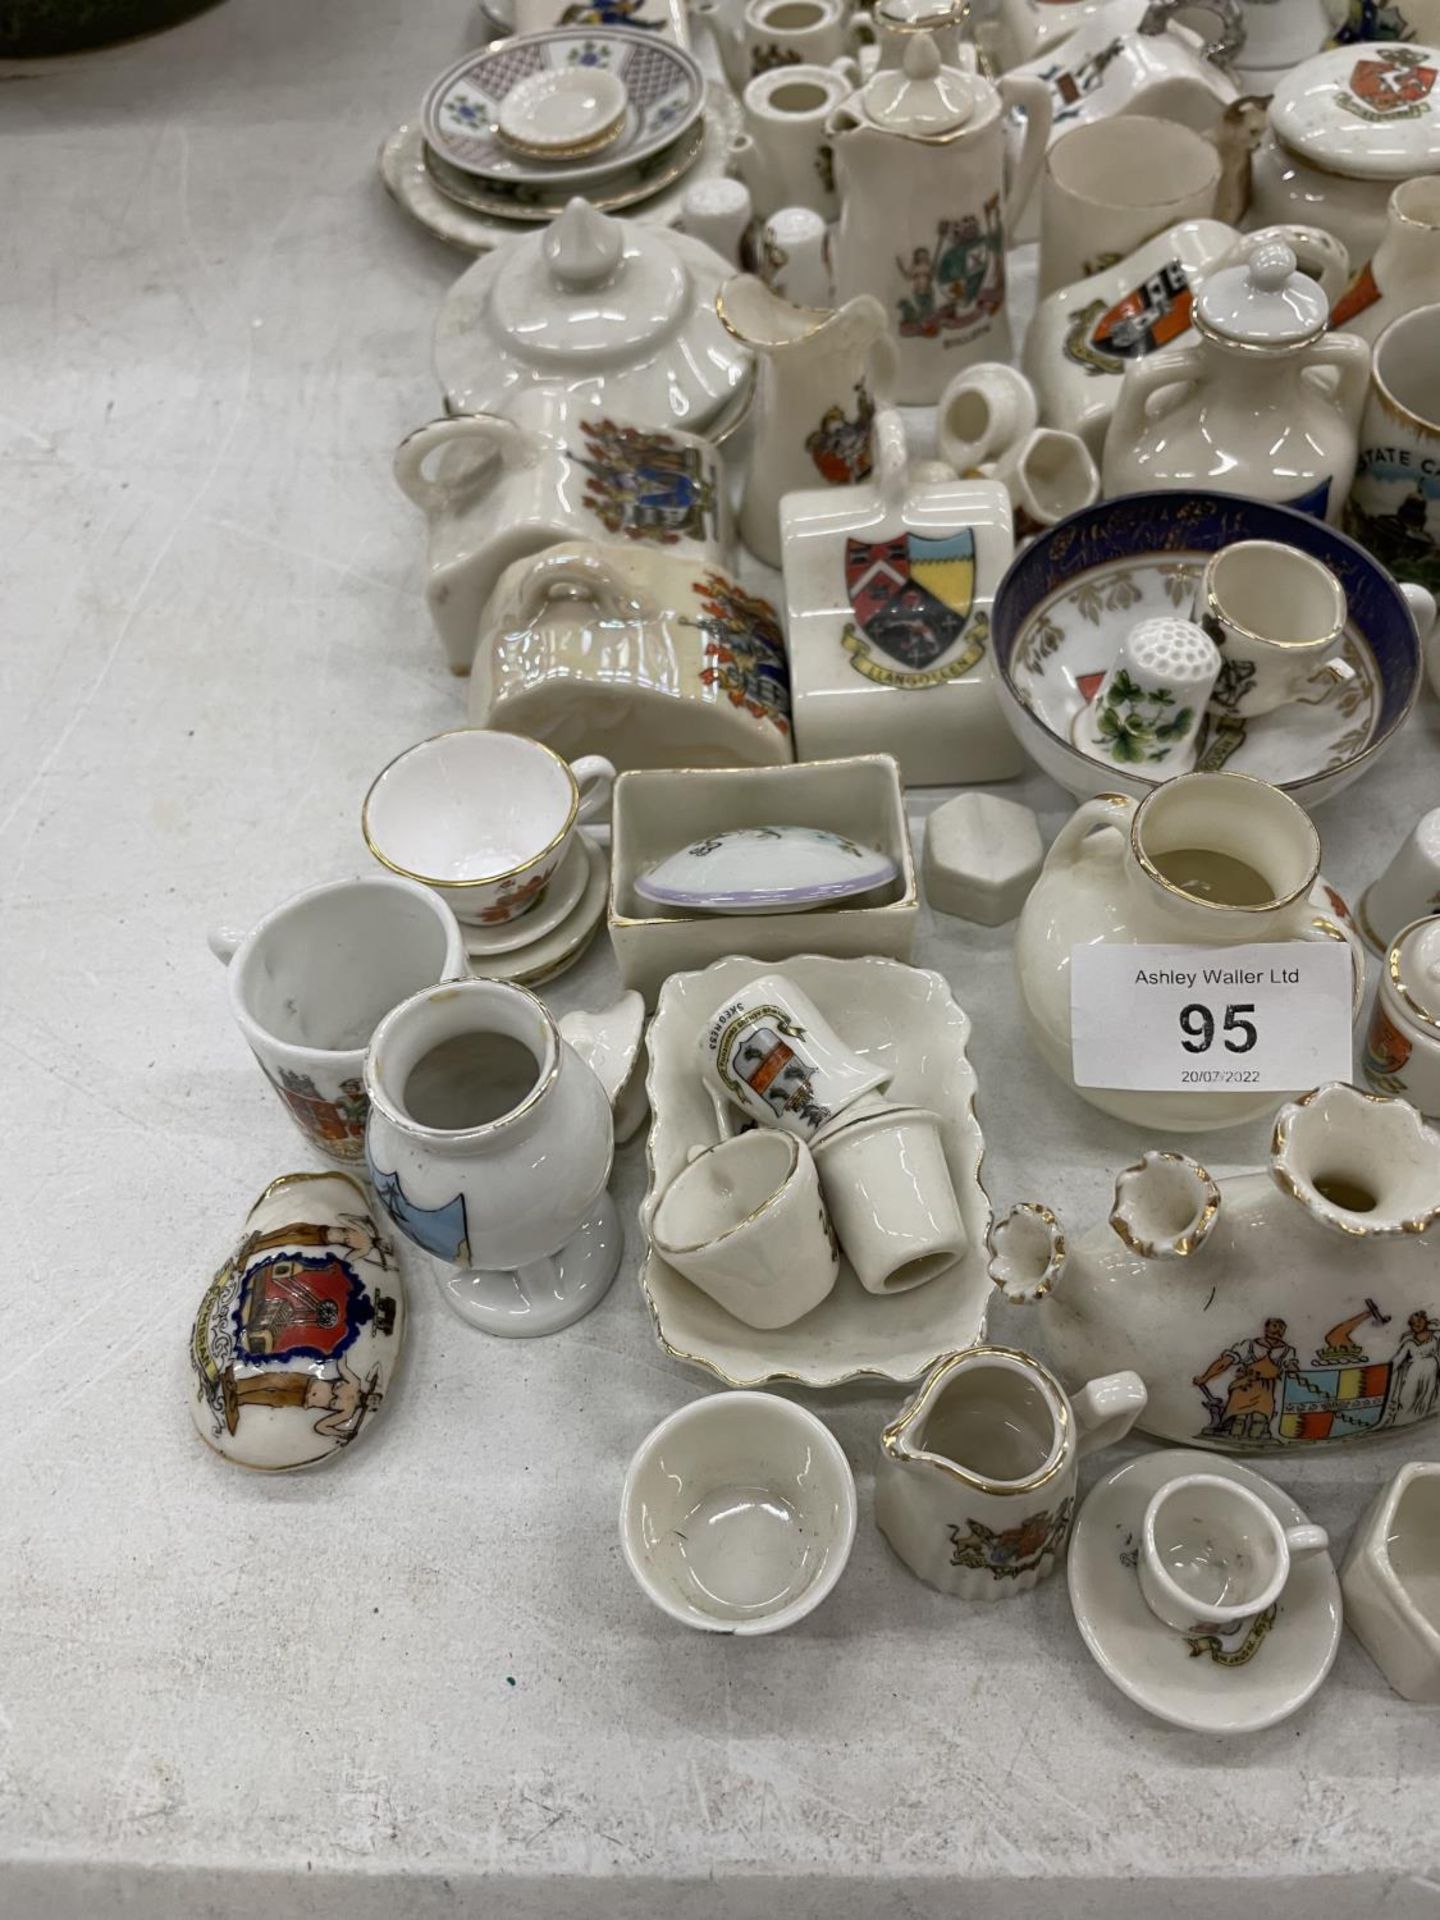 A LARGE QUANTITY OF CRESTED WARE TO INCLUDE MINIATURE CHEESE DISHES, PLATES, VASES, CUPS, JUGS, ETC - Image 2 of 11